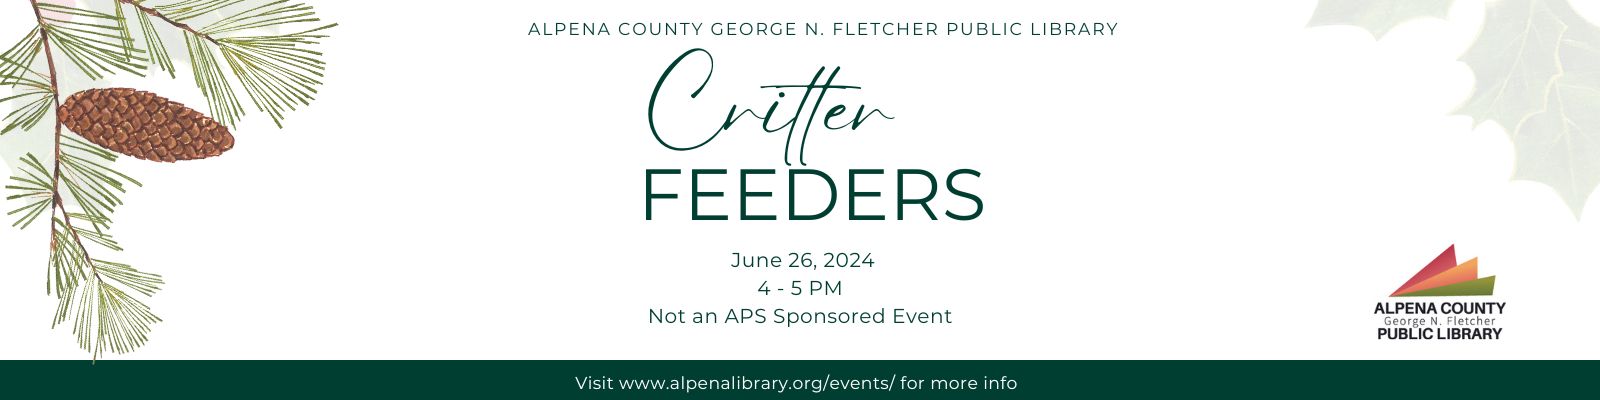 Critter Feeder feature graphic